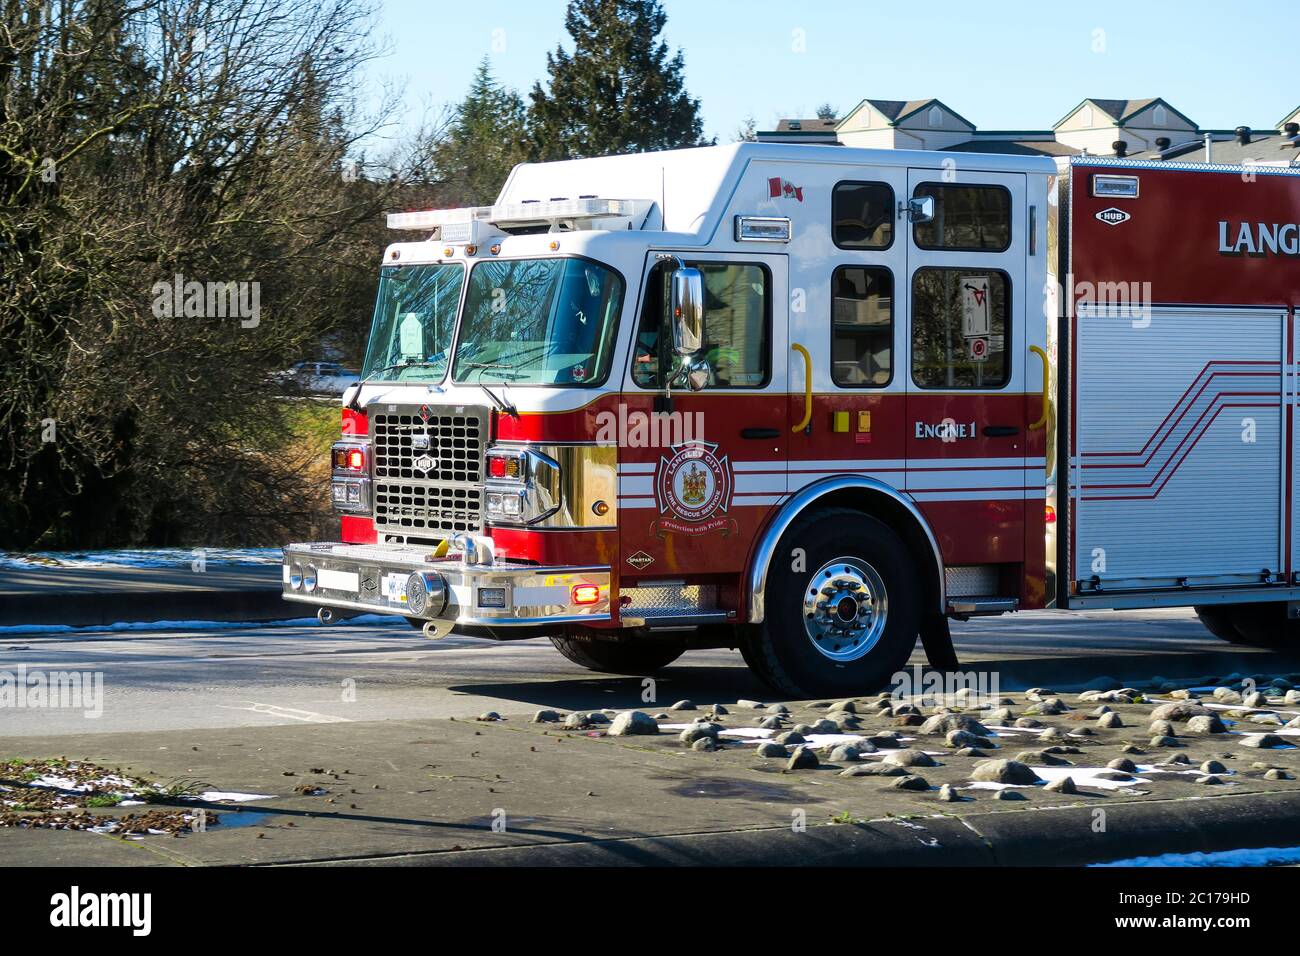 Fire Truck in Langley BC, Canada. Stock Photo